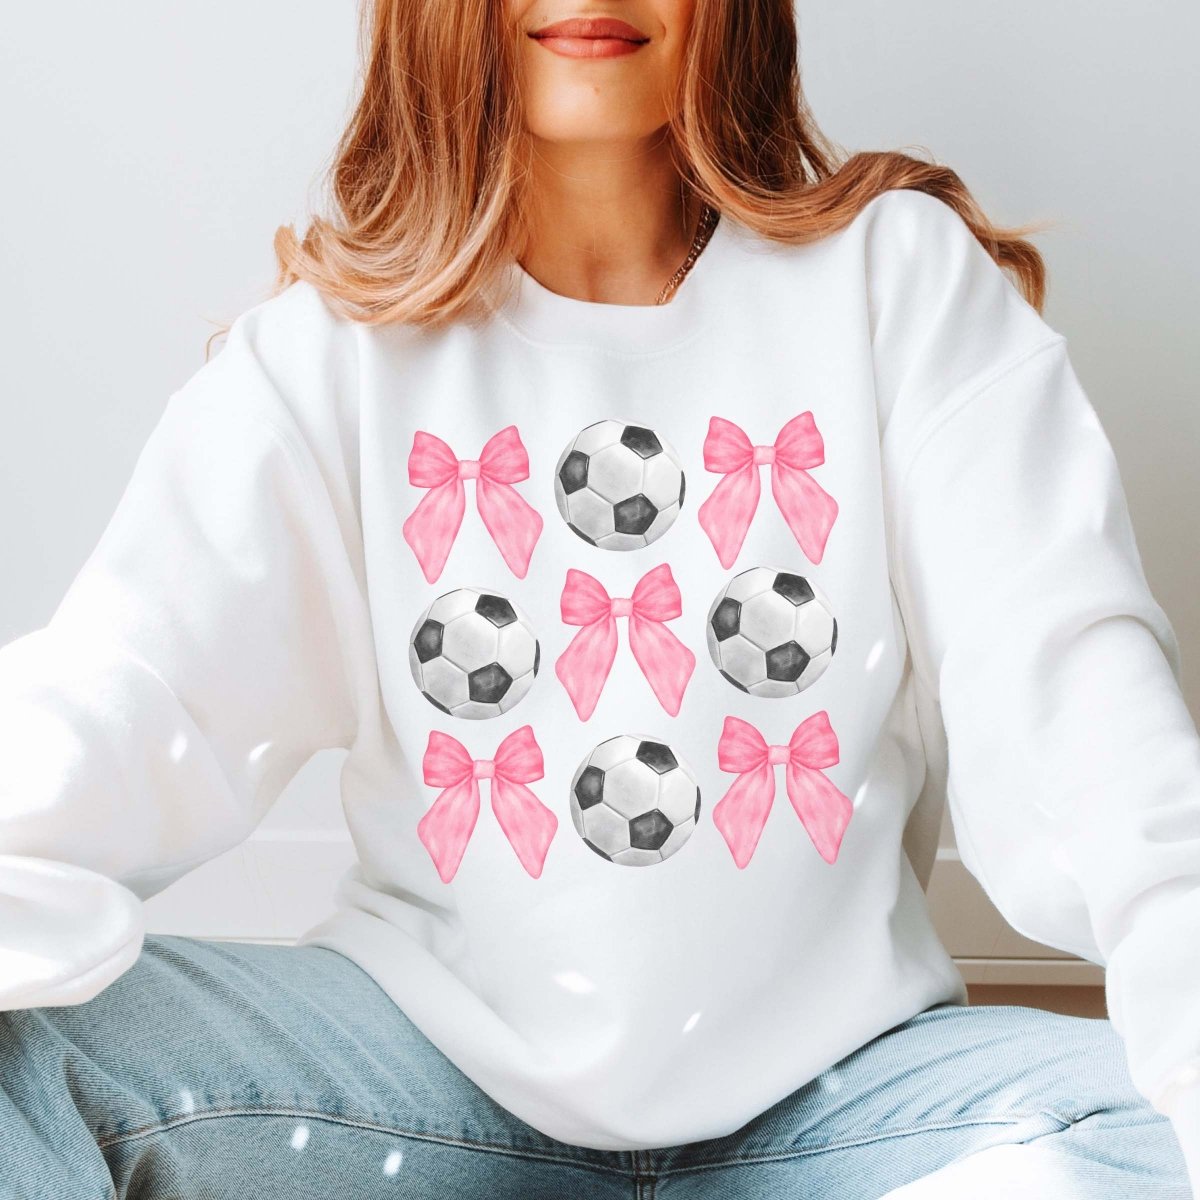 Soccer And Bows Collage Sweatshirt - Trendy Item - Limeberry Designs